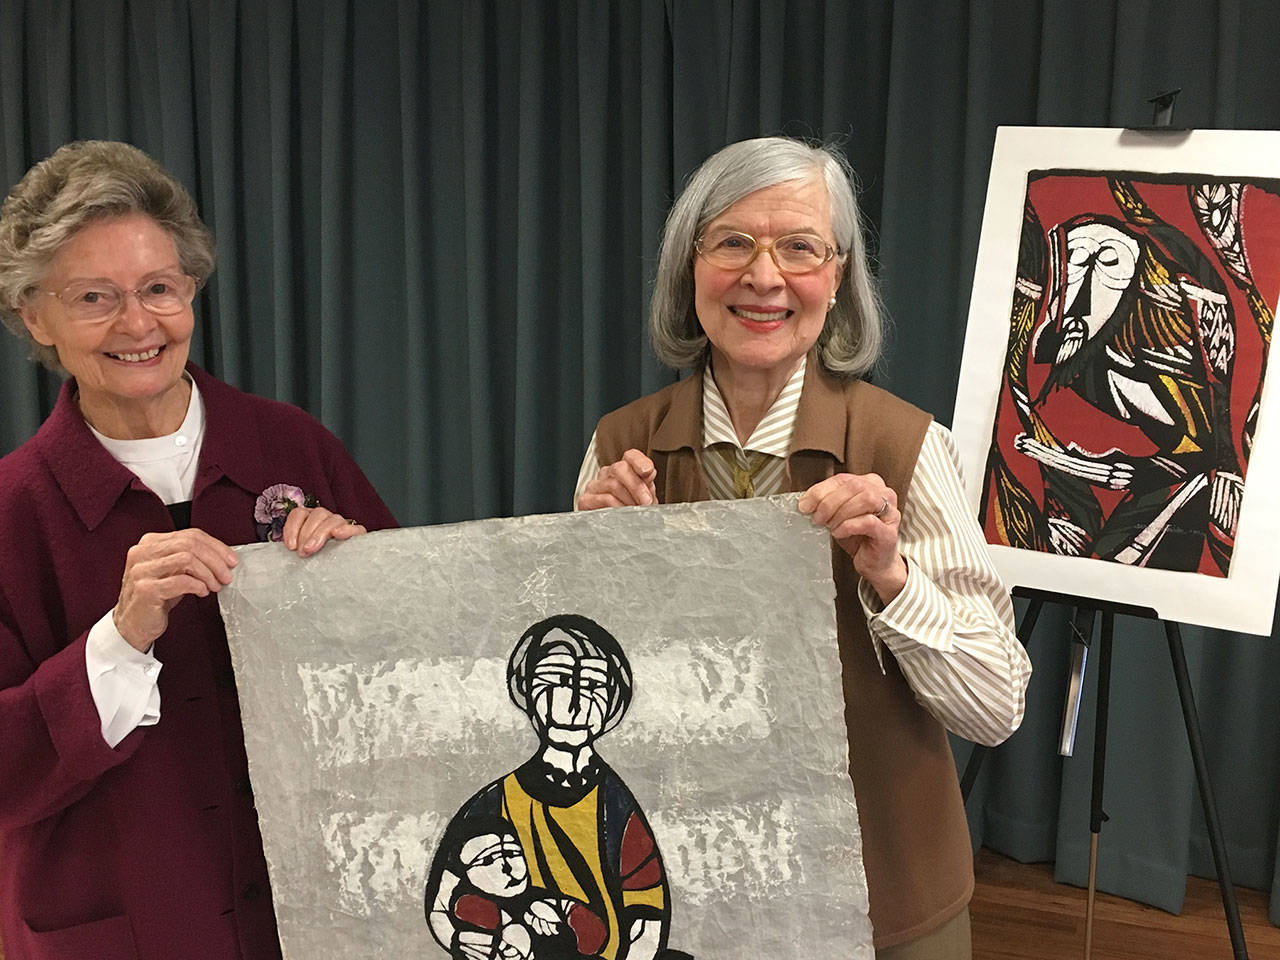 Nancy Exell, chair of the Covenant Shores Arts Commission, poses with Anne Pyle, the curator of the new exhibit opening soon at the Shores’ Lighthouse Gallery featuring the work of Sadao Watanabe. Photo courtesy of Greg Asimakoupoulos